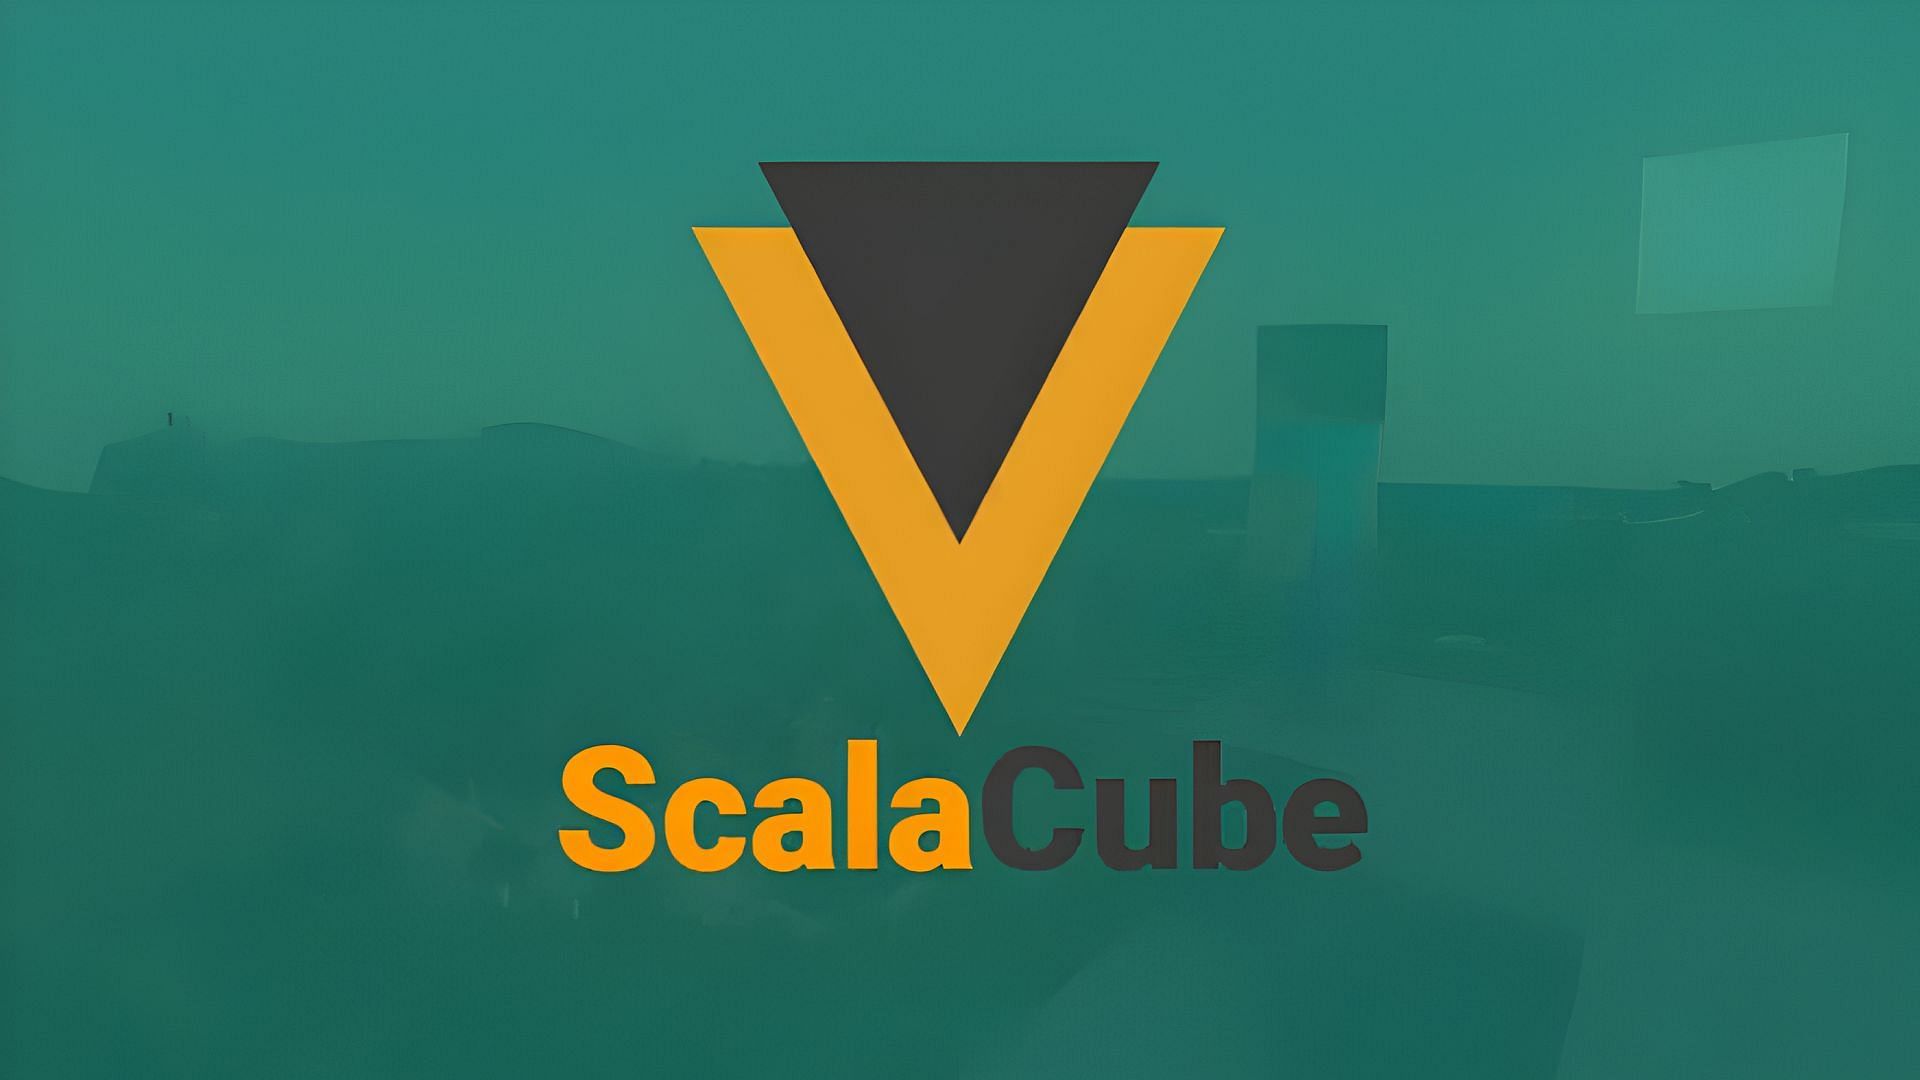 ScalaCube has a great free option to get Minecraft server admins started (Image via ScalaCube)